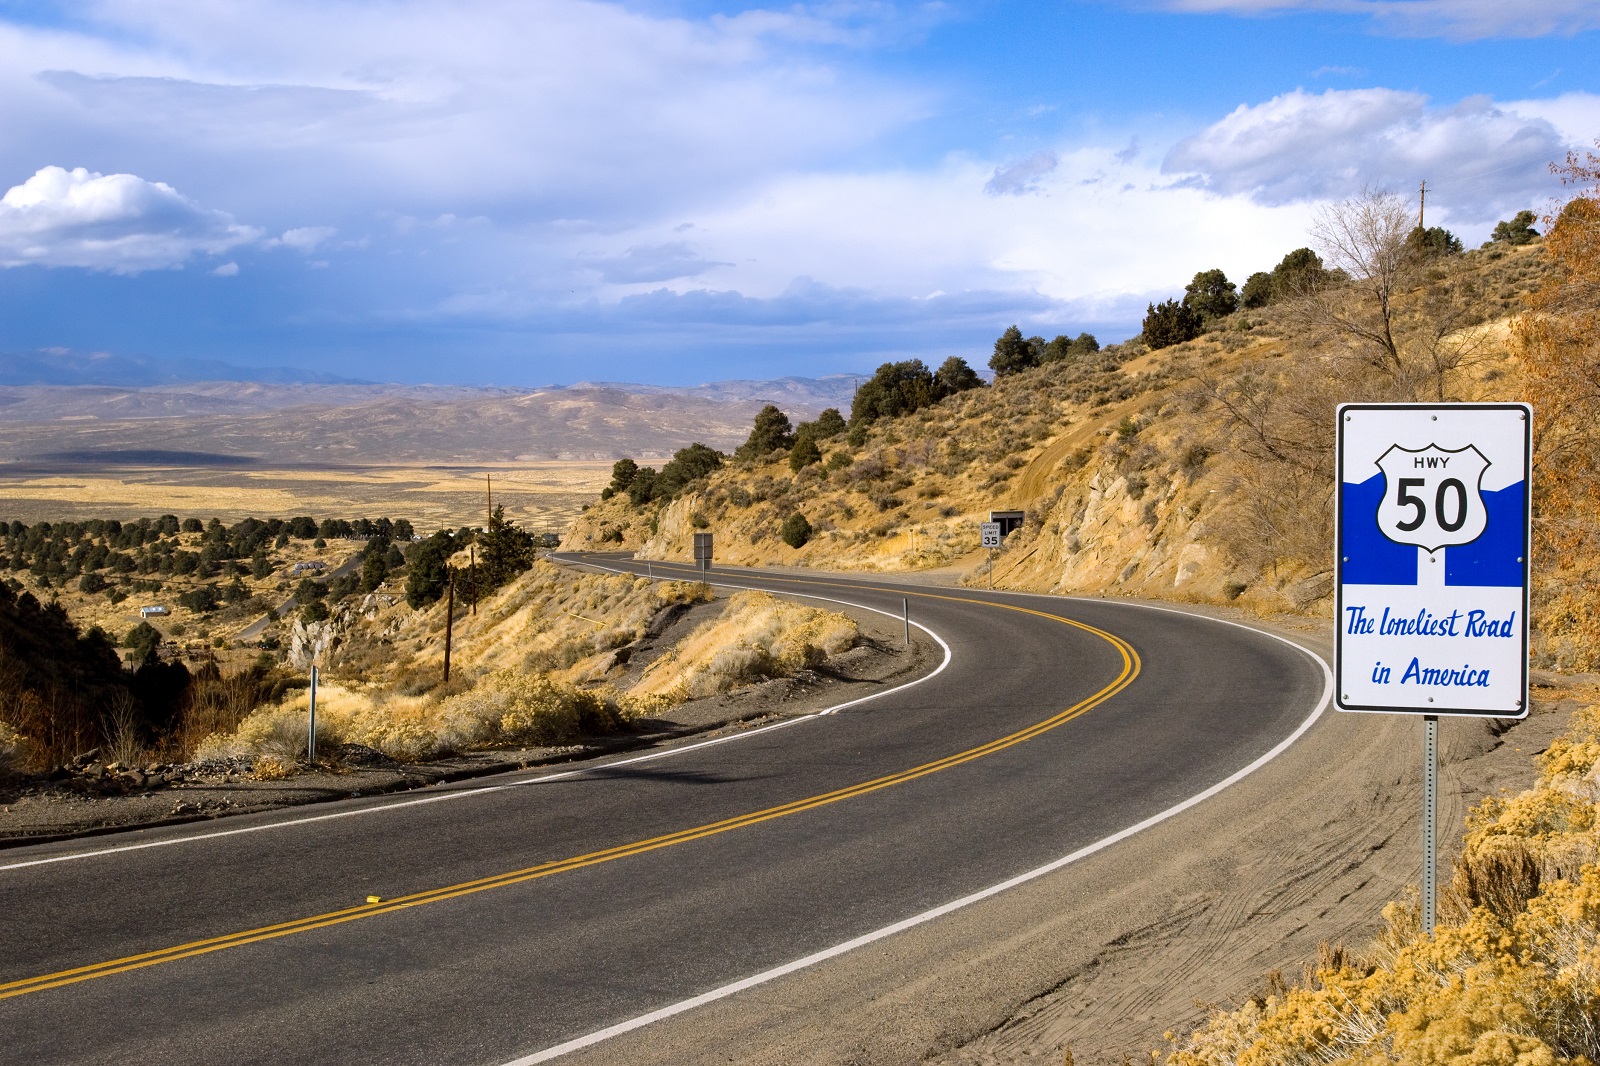 <p class="wp-caption-text">Image Credit: Shutterstock / Natalia Bratslavsky</p>  <p><span>Crossing Nevada, this route is known for its desolate beauty. It’s a quiet, reflective drive through the American desert, perfect for those who enjoy solitude.</span></p>